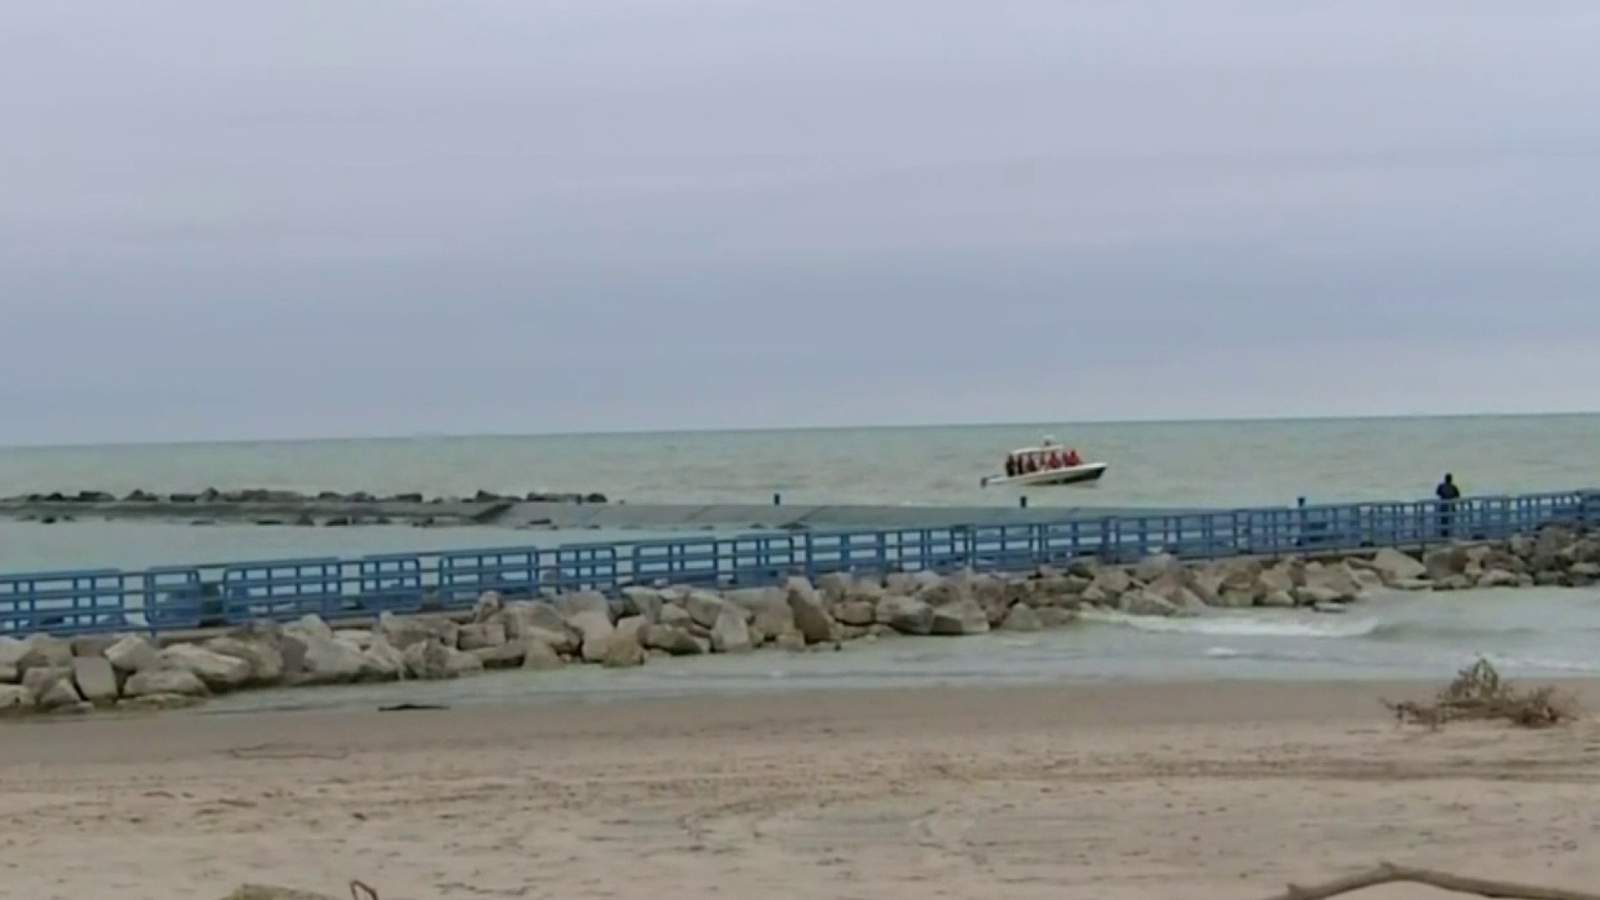 Search for missing 6-year-old boy and teen continues in Lake Michigan